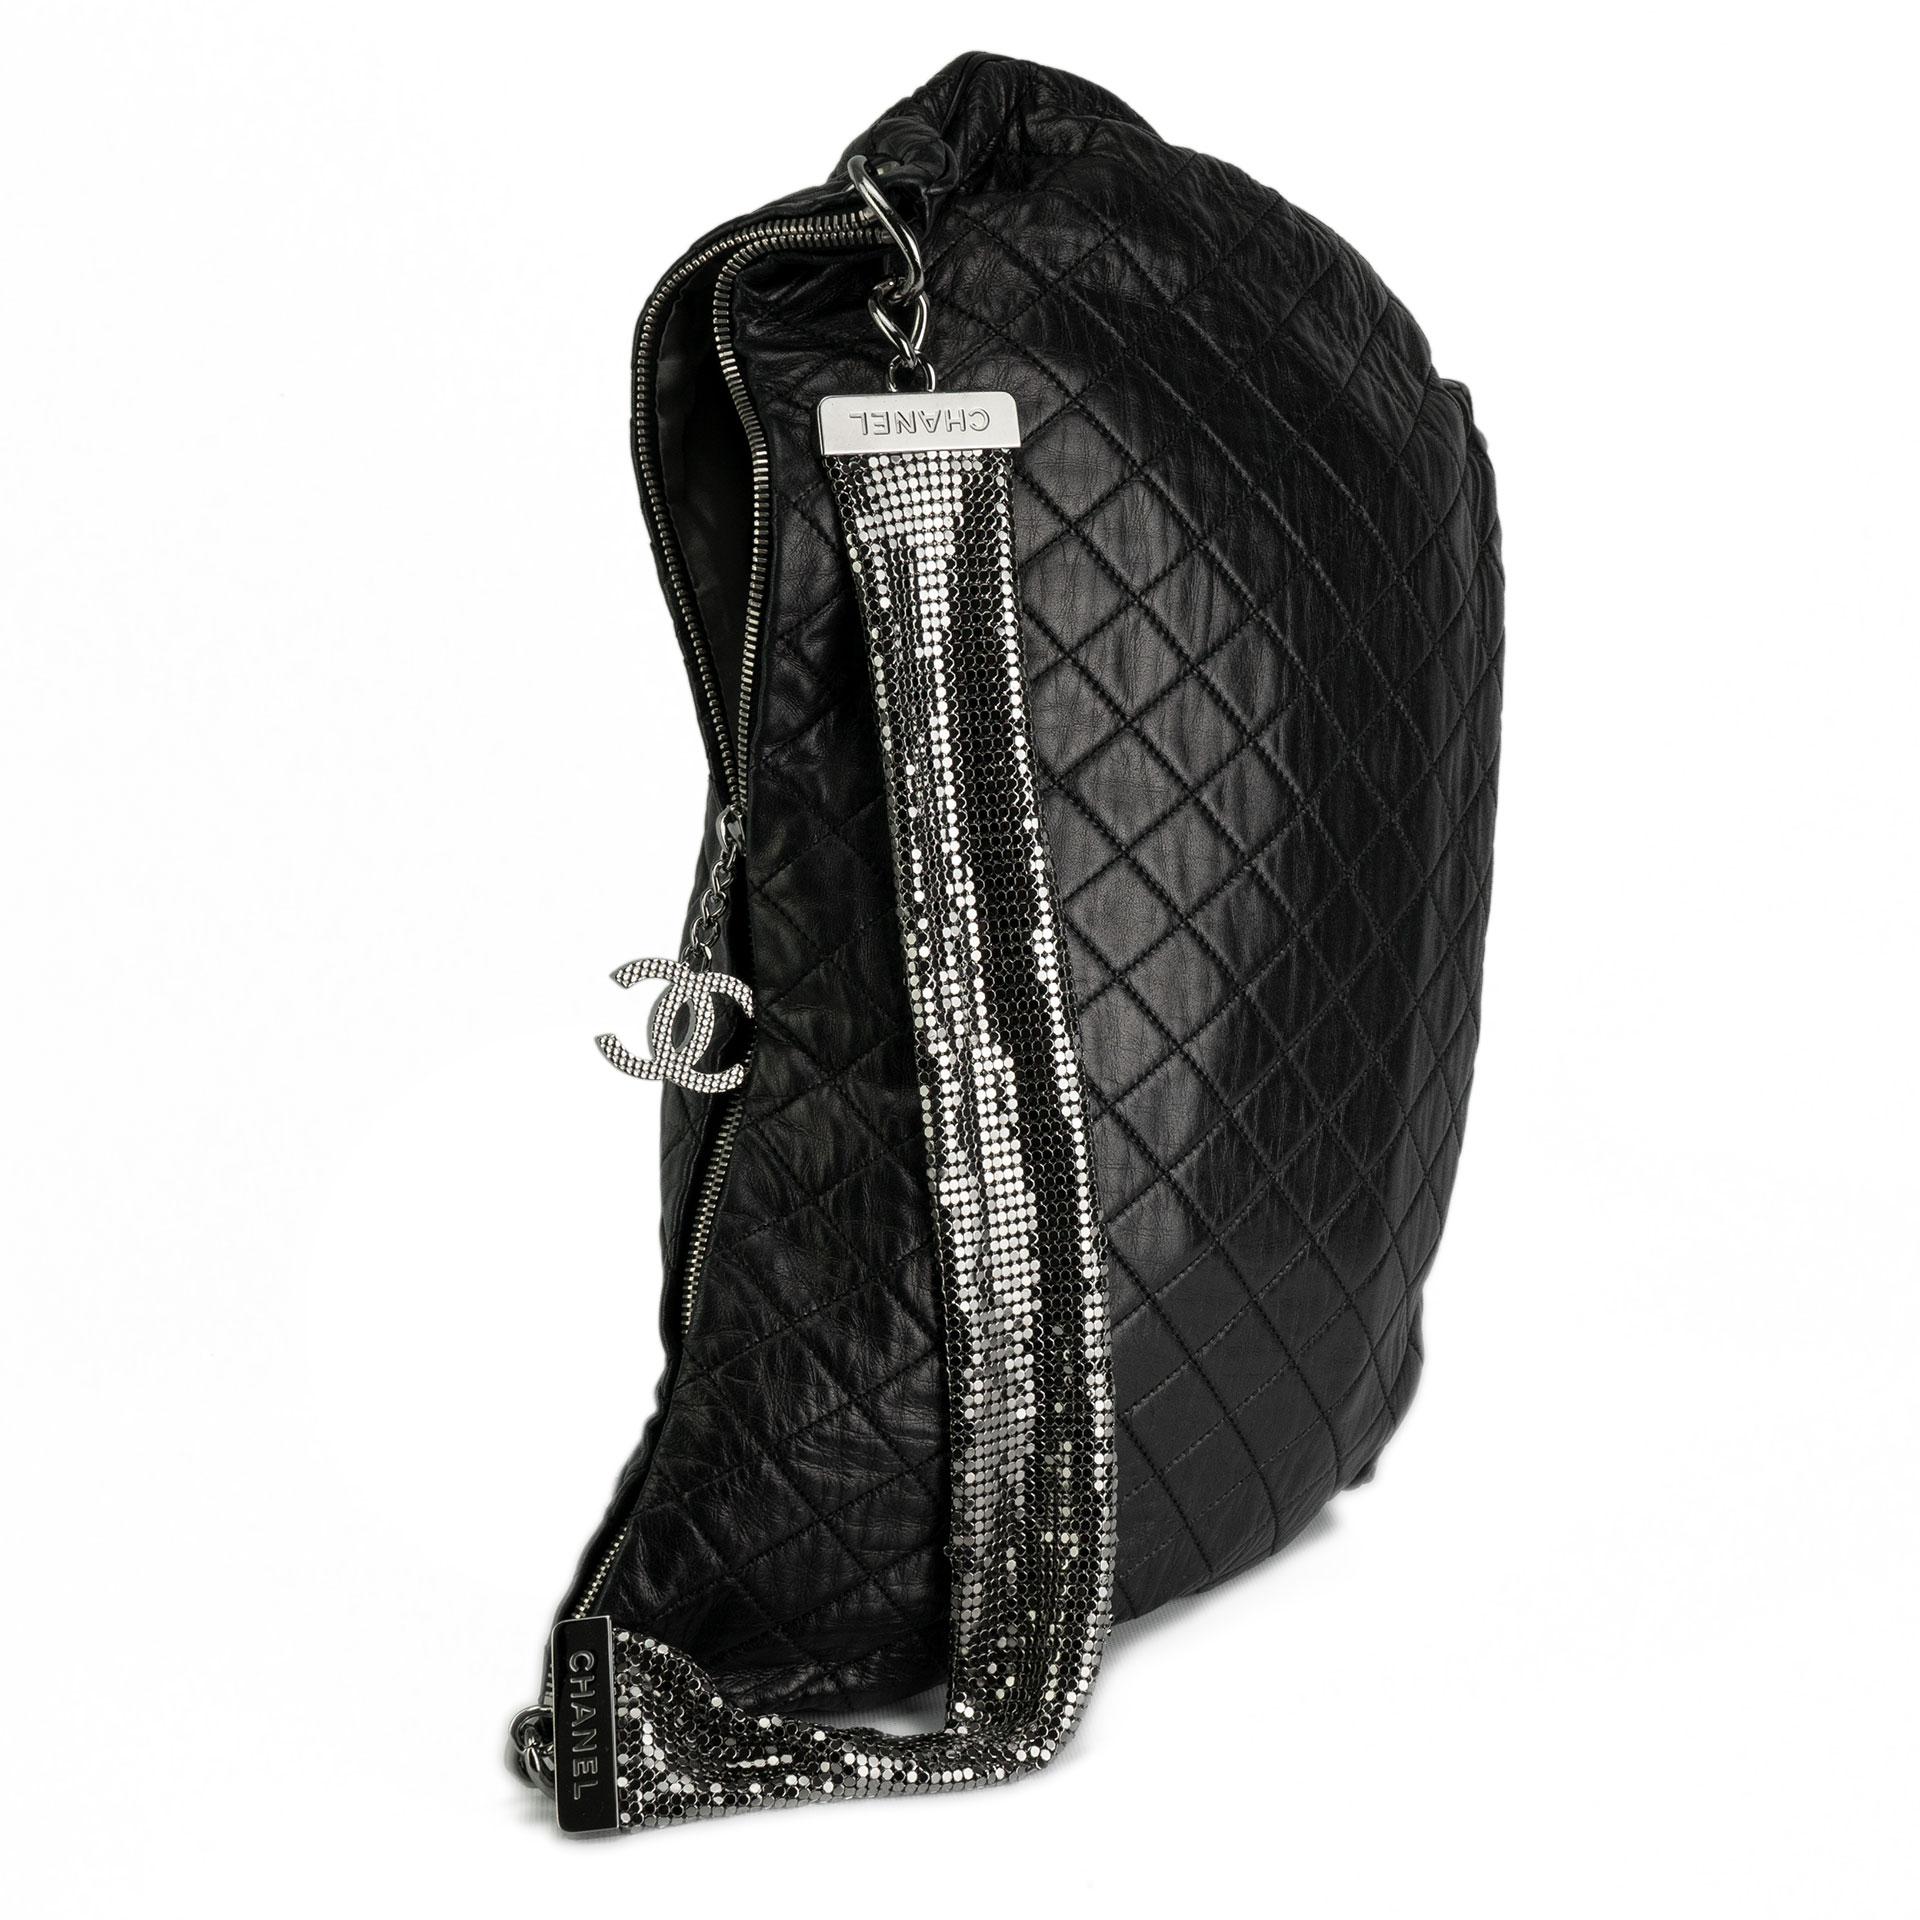 Chanel 2008 Metallic Mesh Soft Quilted Black Lambskin Leather Large Hobo Bag For Sale 1